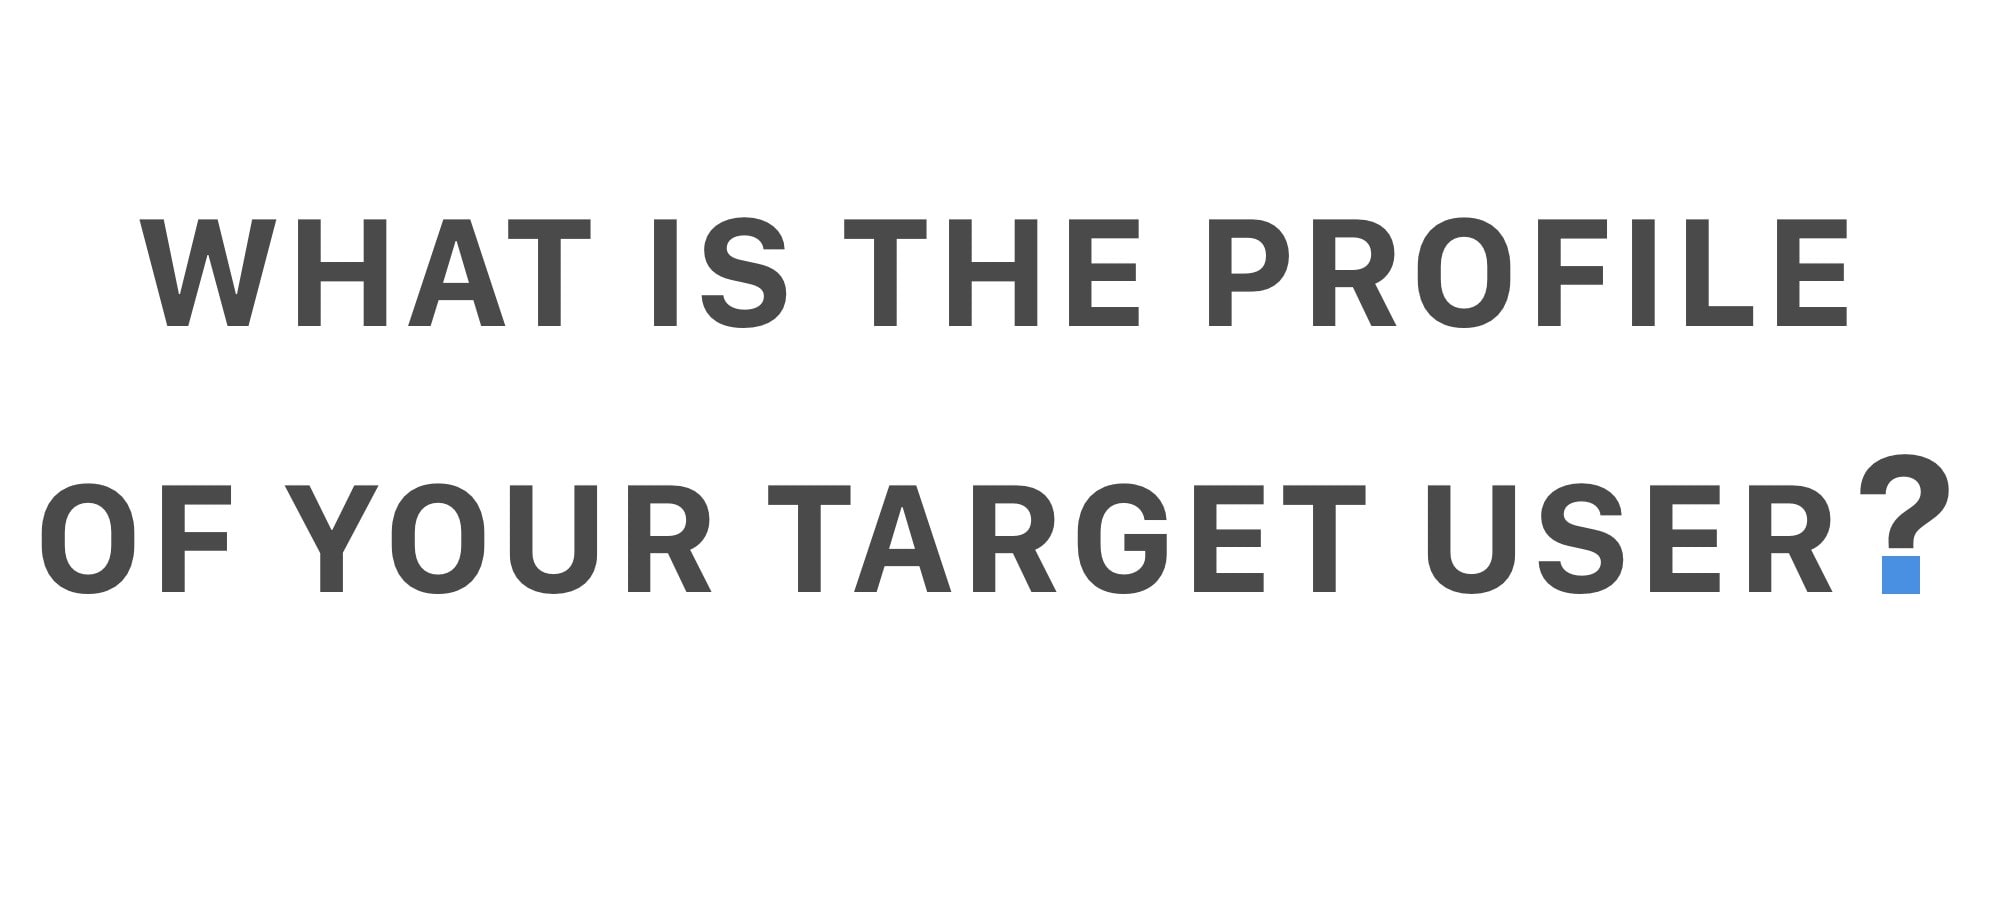 What is the profile of your target user?